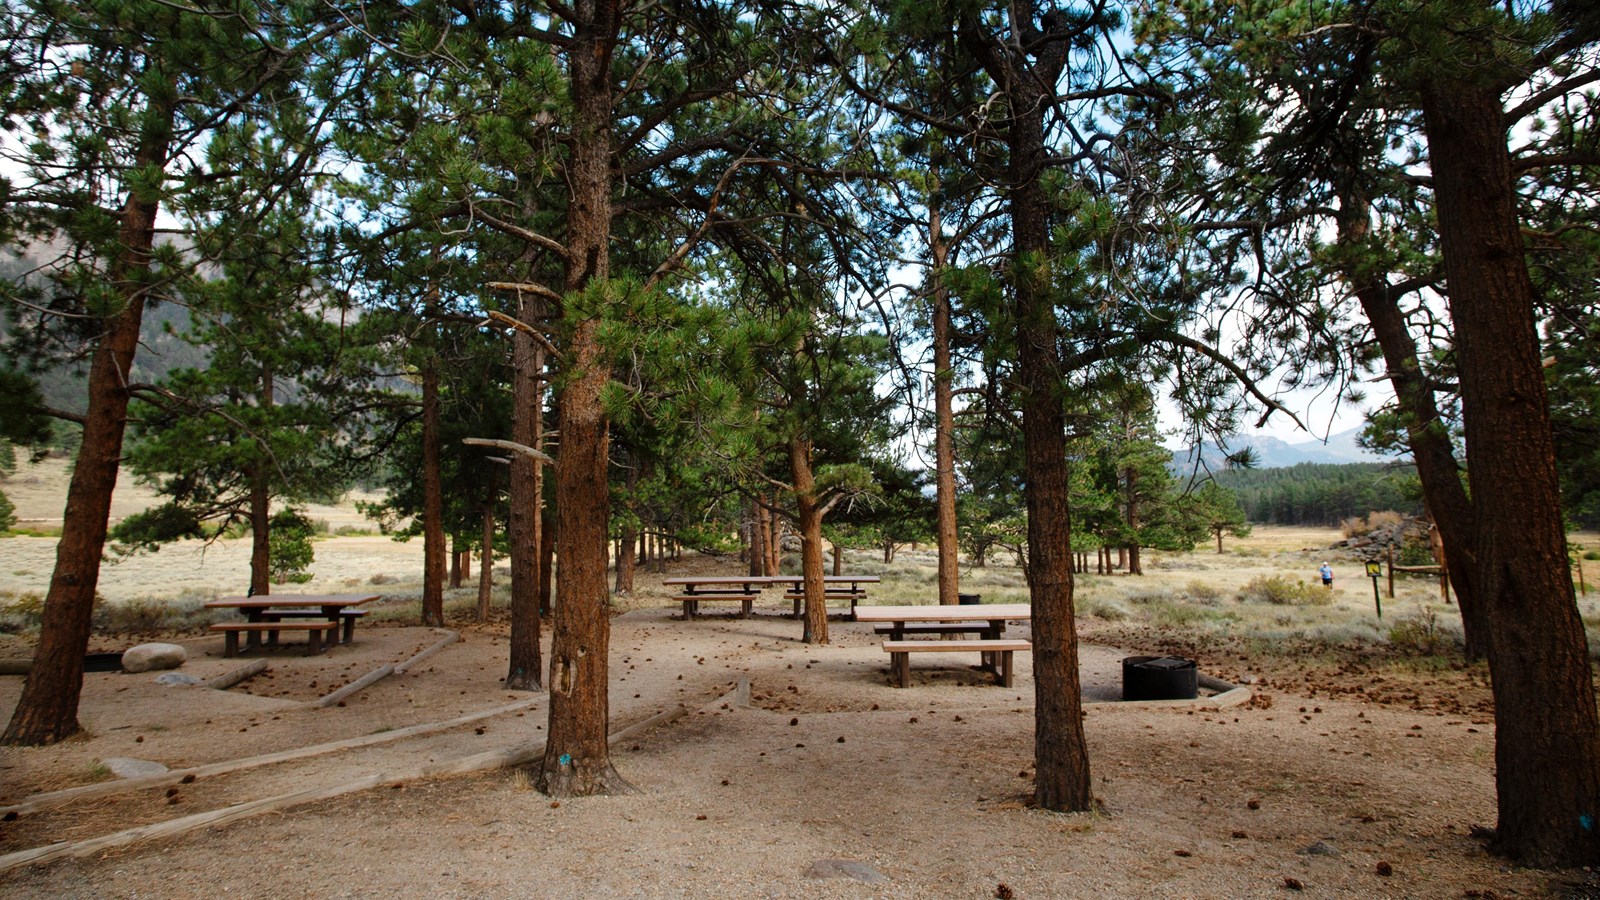 picnic tables under trees